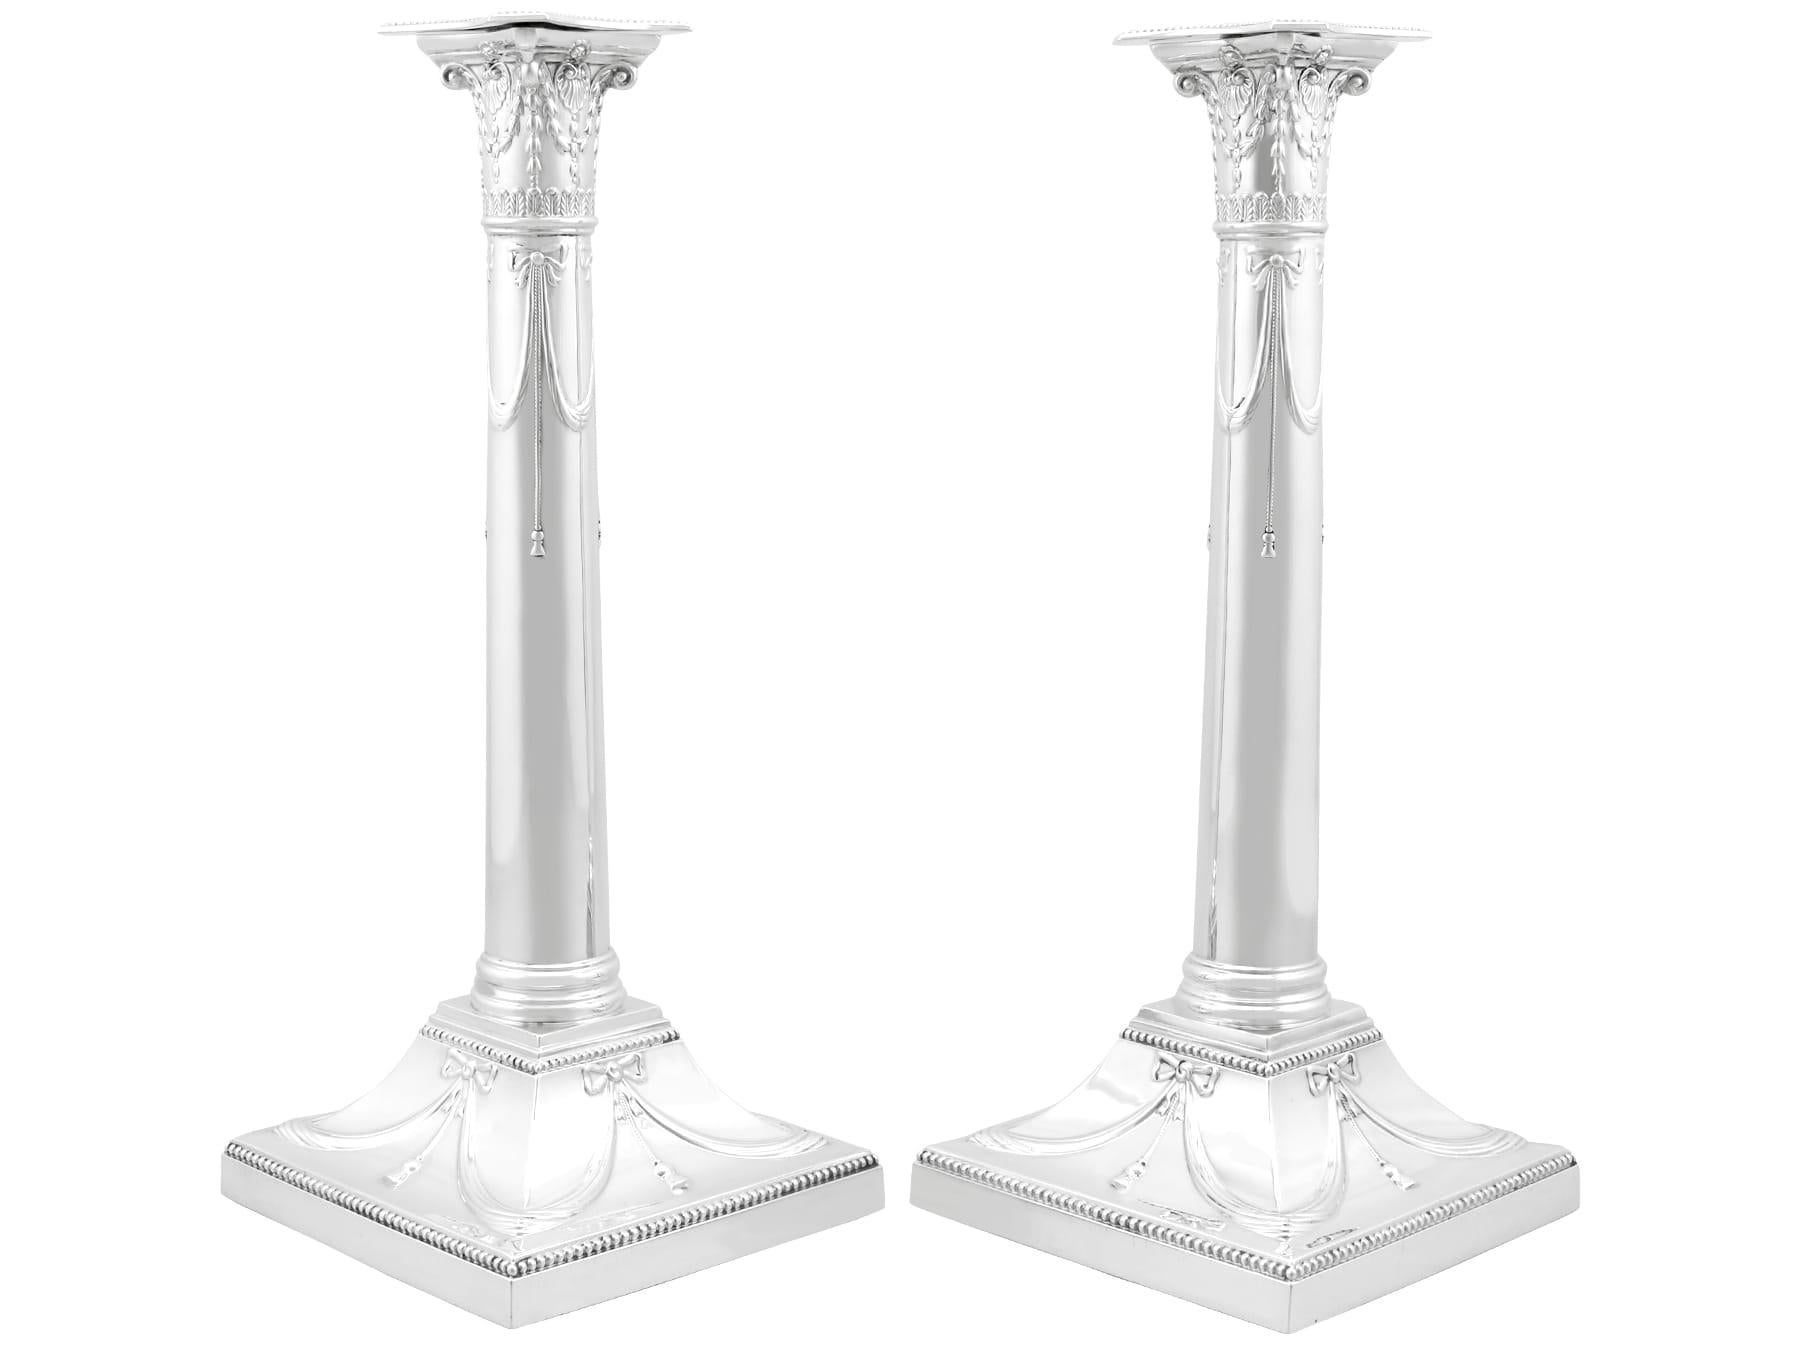 British Antique Sterling Silver Candle Holders (1913)